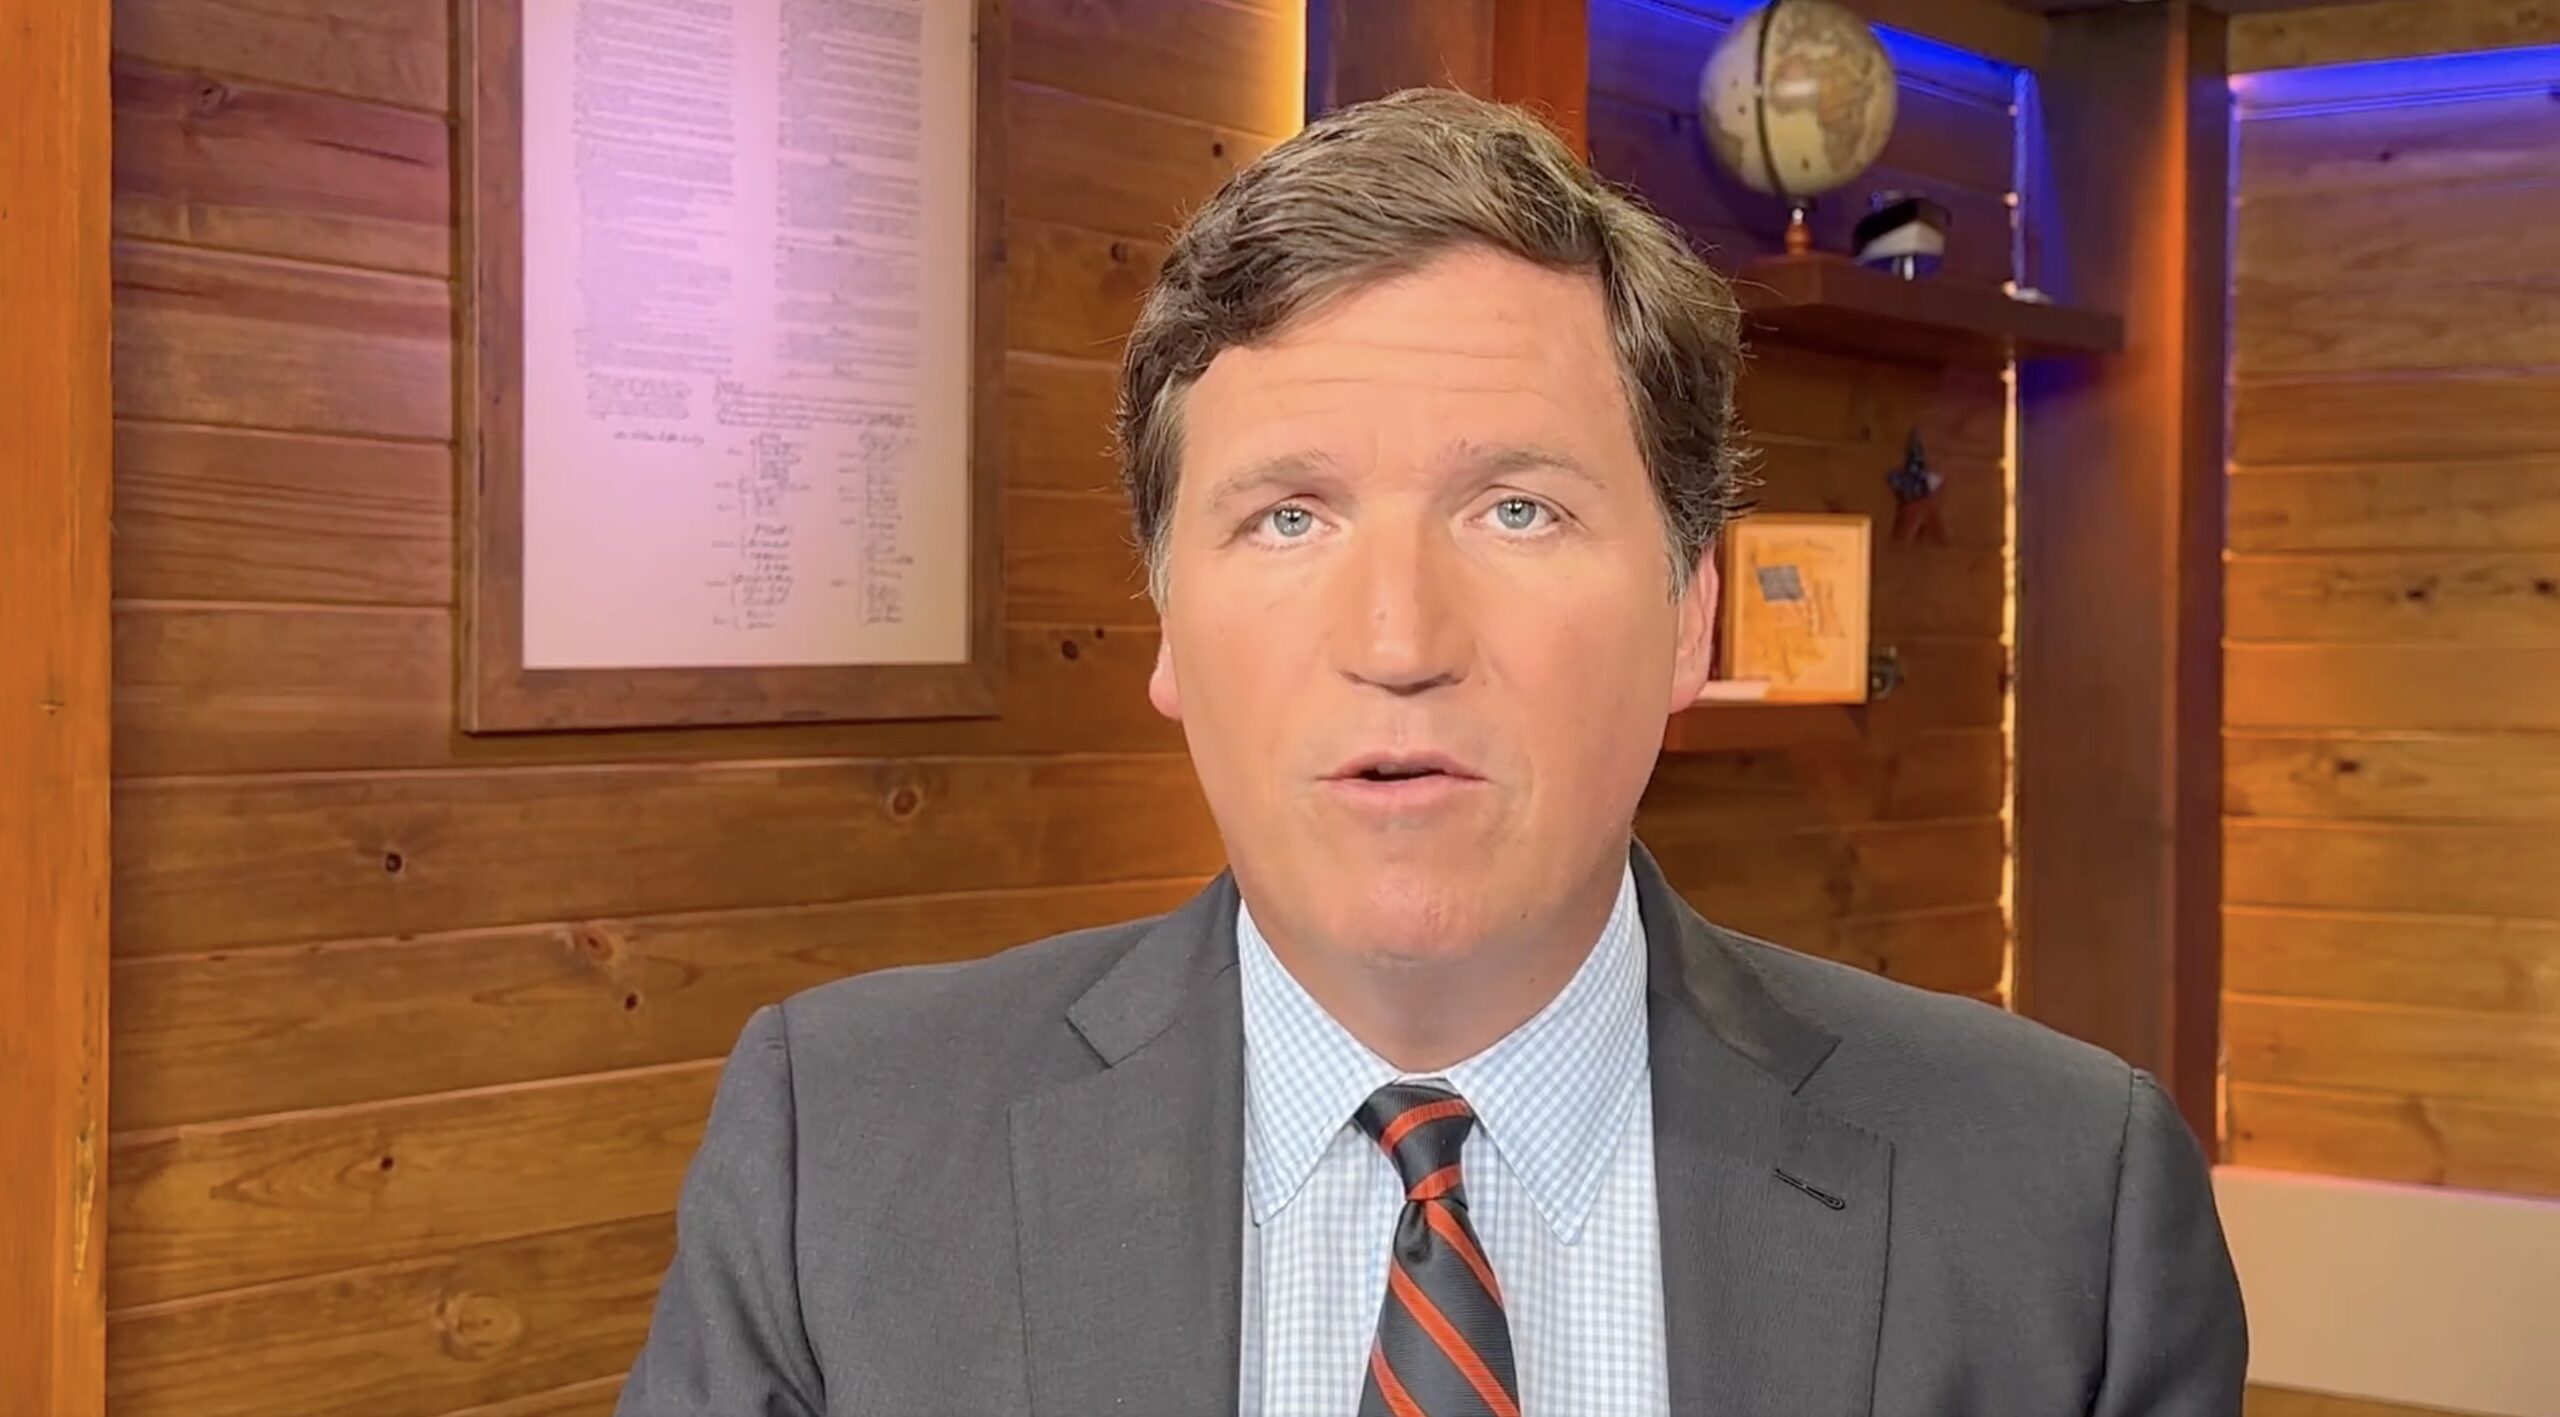 Tucker Carlson Drops First Video After Fox News Ouster